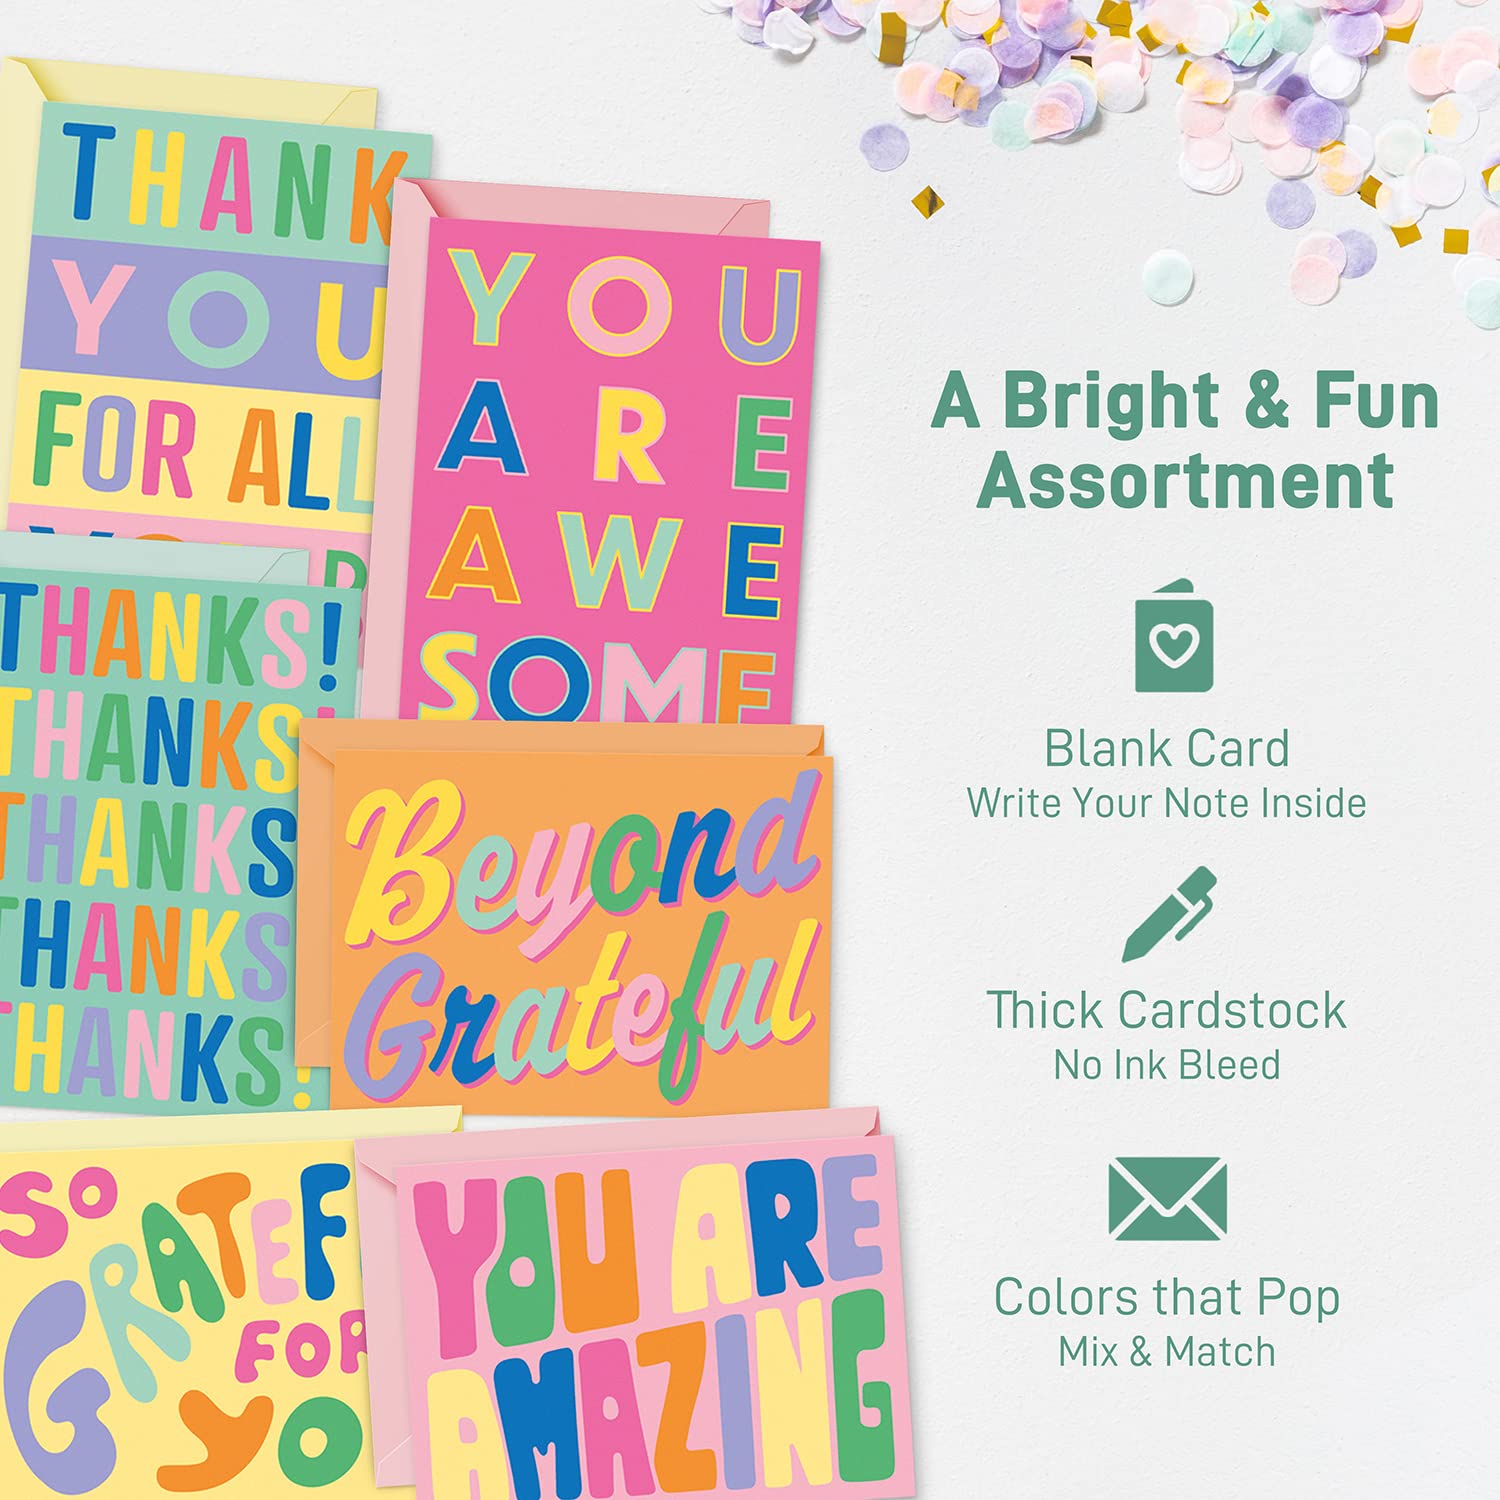 S&O Fun Thank You Cards with Envelopes - Assorted Thank You Cards to Express Gratitude - Thank You Notes with Envelopes Set of 24 - Gratitude Note Cards with Envelopes in Pop Colors to Mix & Match